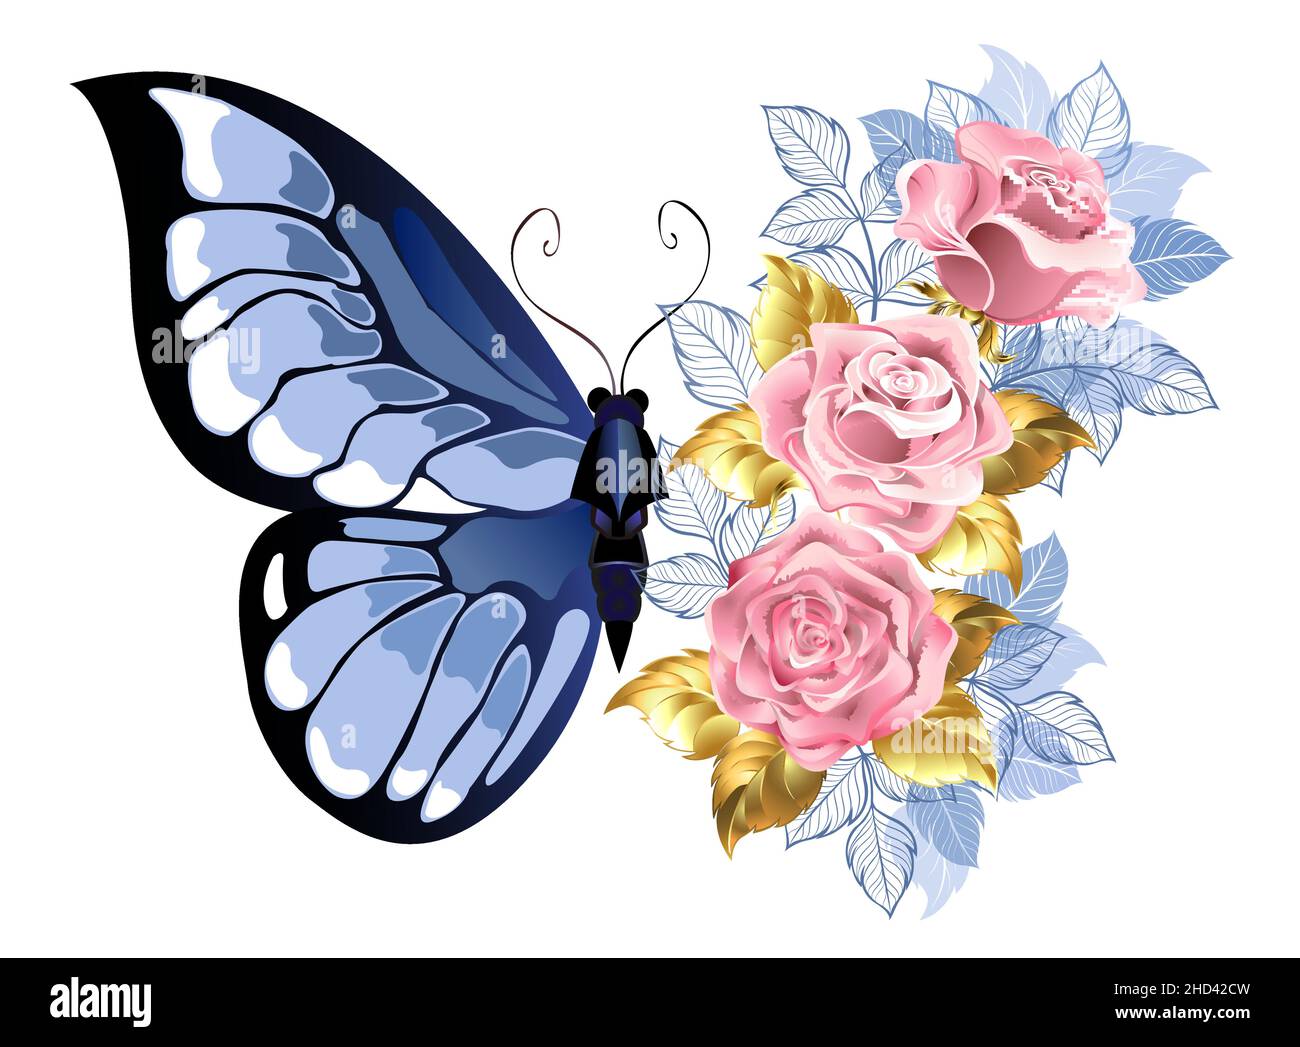 Composition of blue butterfly and bouquet of delicate, pink roses with blue and gold jewelry leaves on white background. Stock Vector